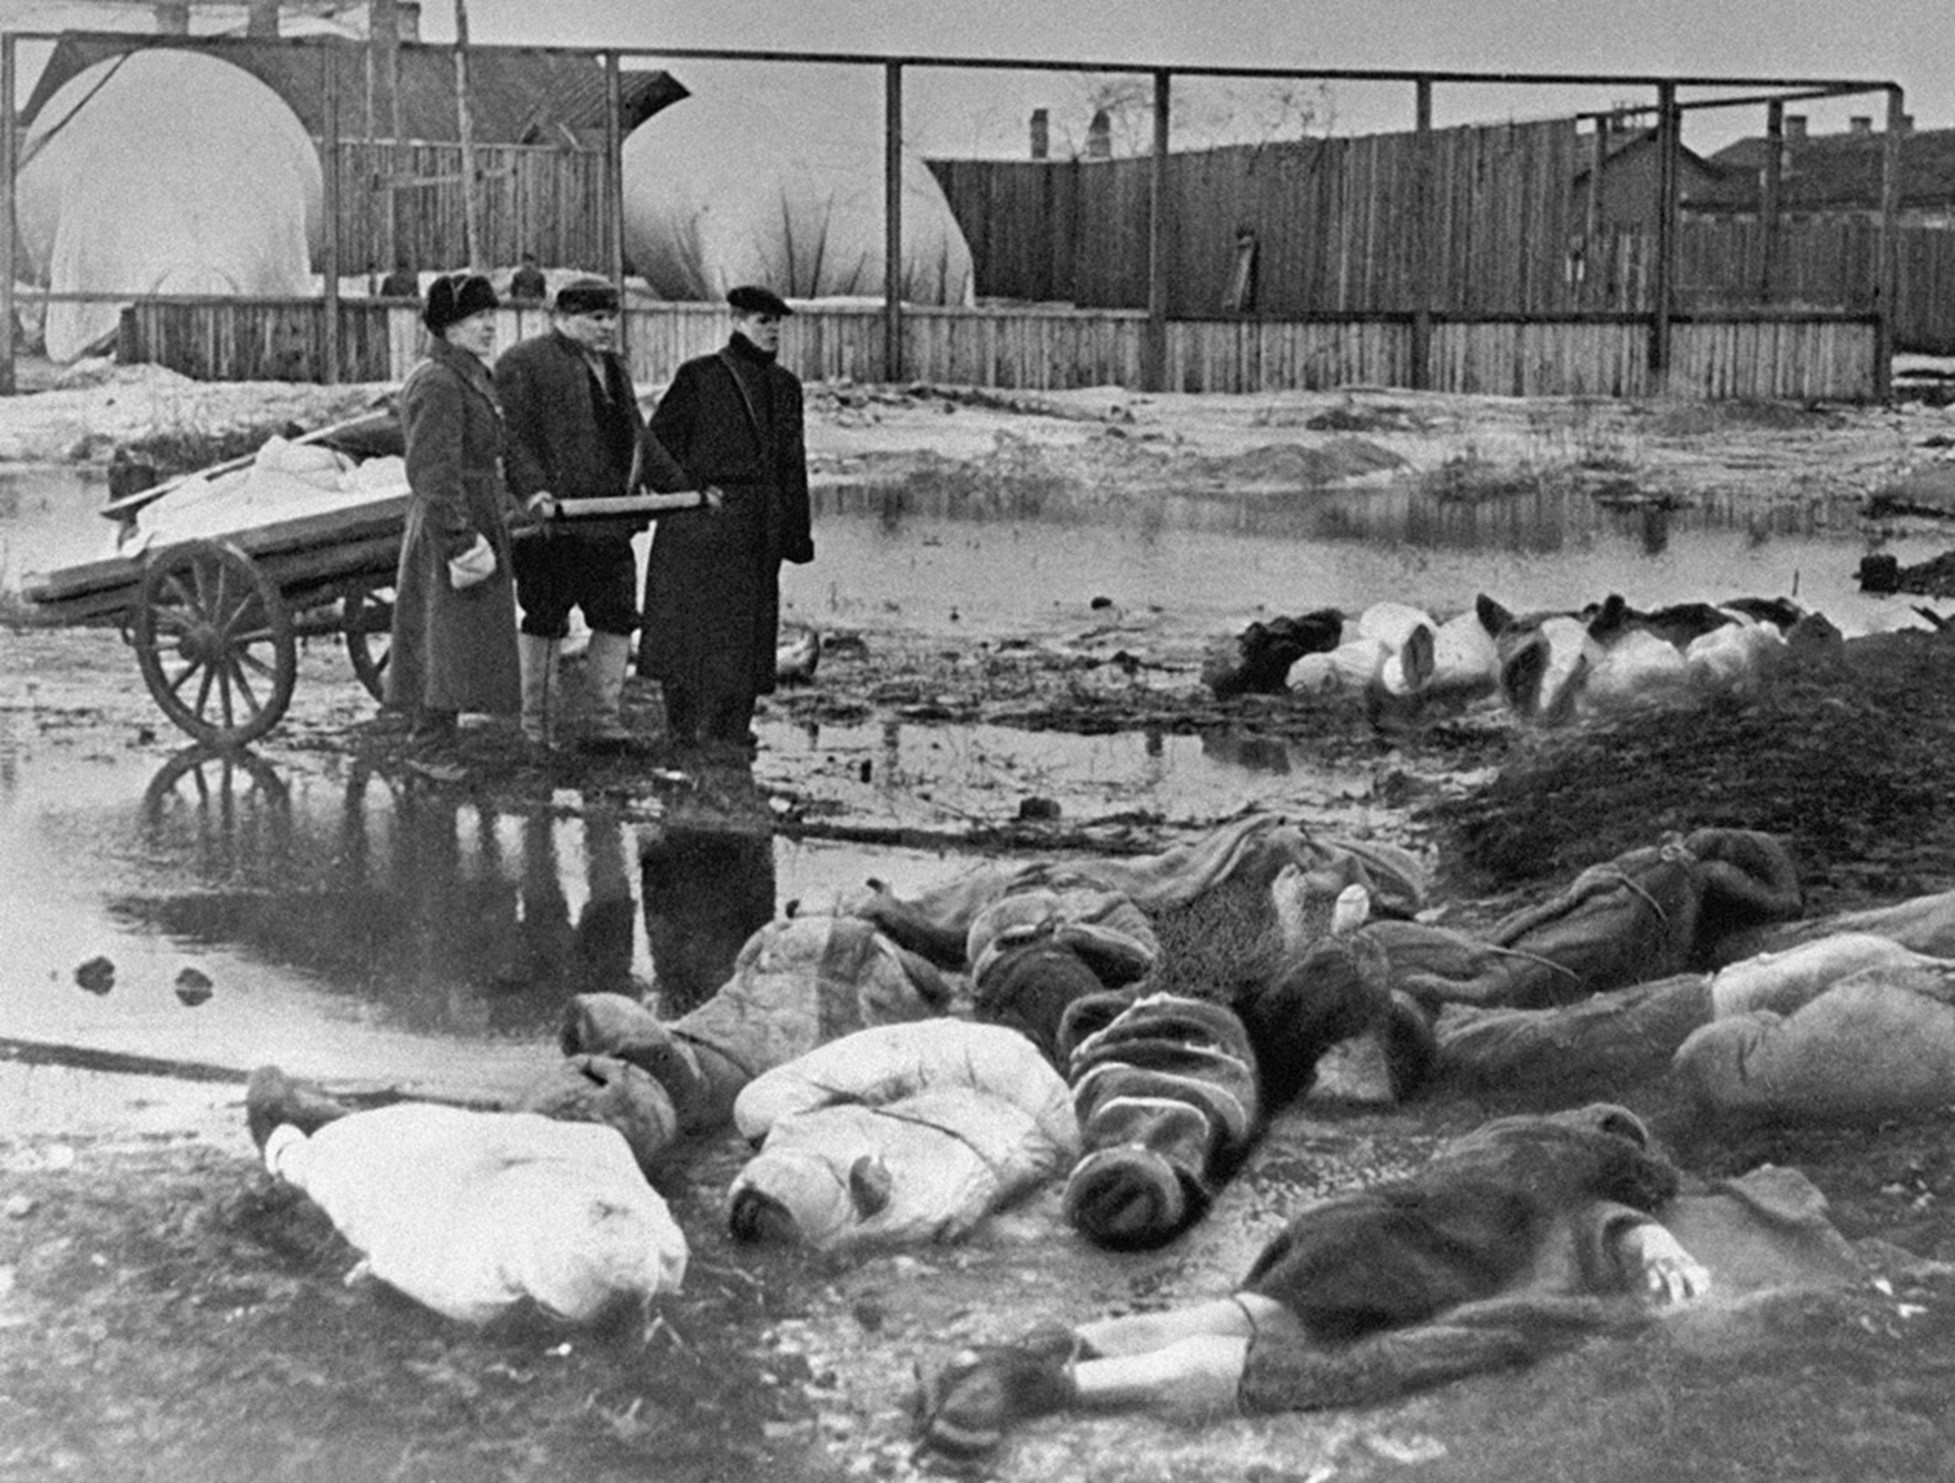 Burying the dead during the Siege of Leningrad. Source